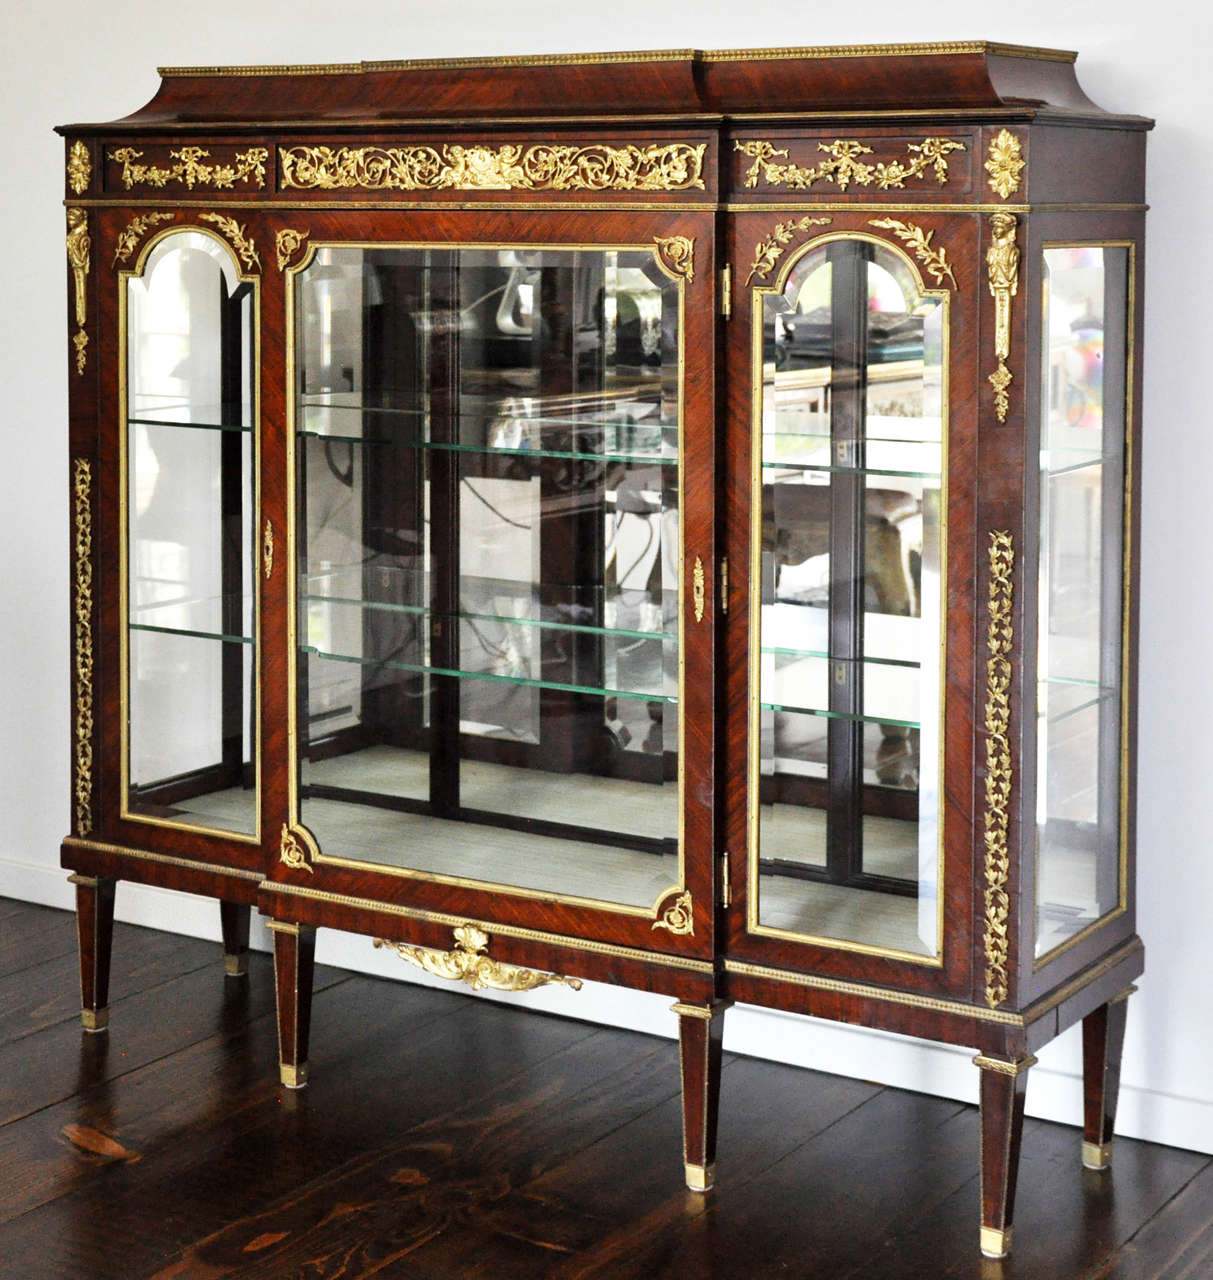 Rare Neoclassical Louis XVI Style Mahogany and Gilt Bronze-Mounted Vitrine with glass shelves and mirrored back panel. Three-part rectangular flamed mahogany Neoclassical shaped body, hand beveled square door flanked by two arched hand rectangular